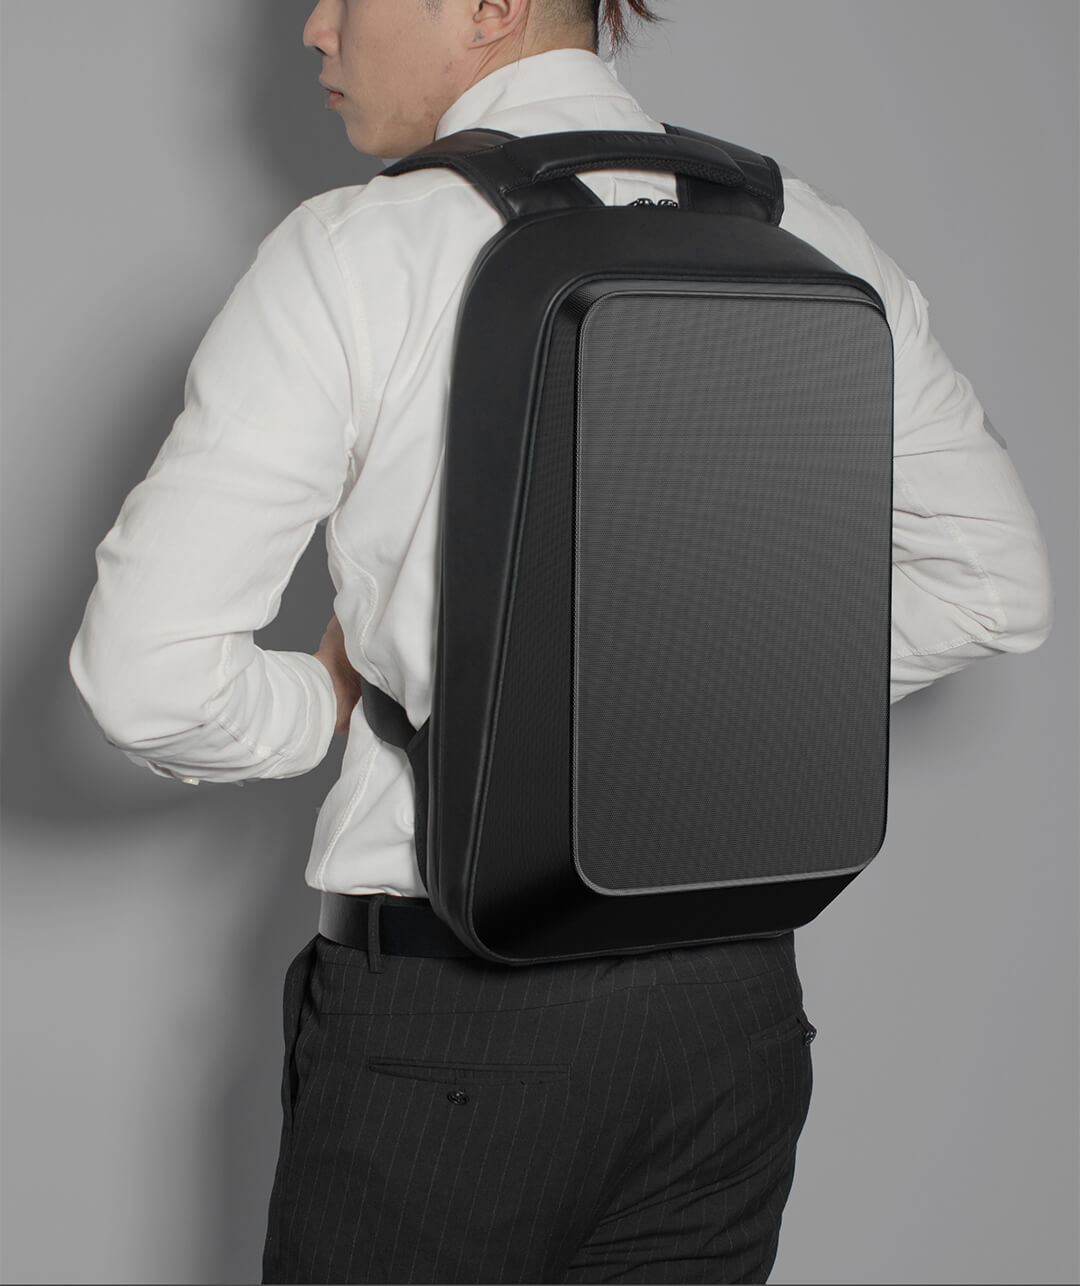 The Black Square Backpack